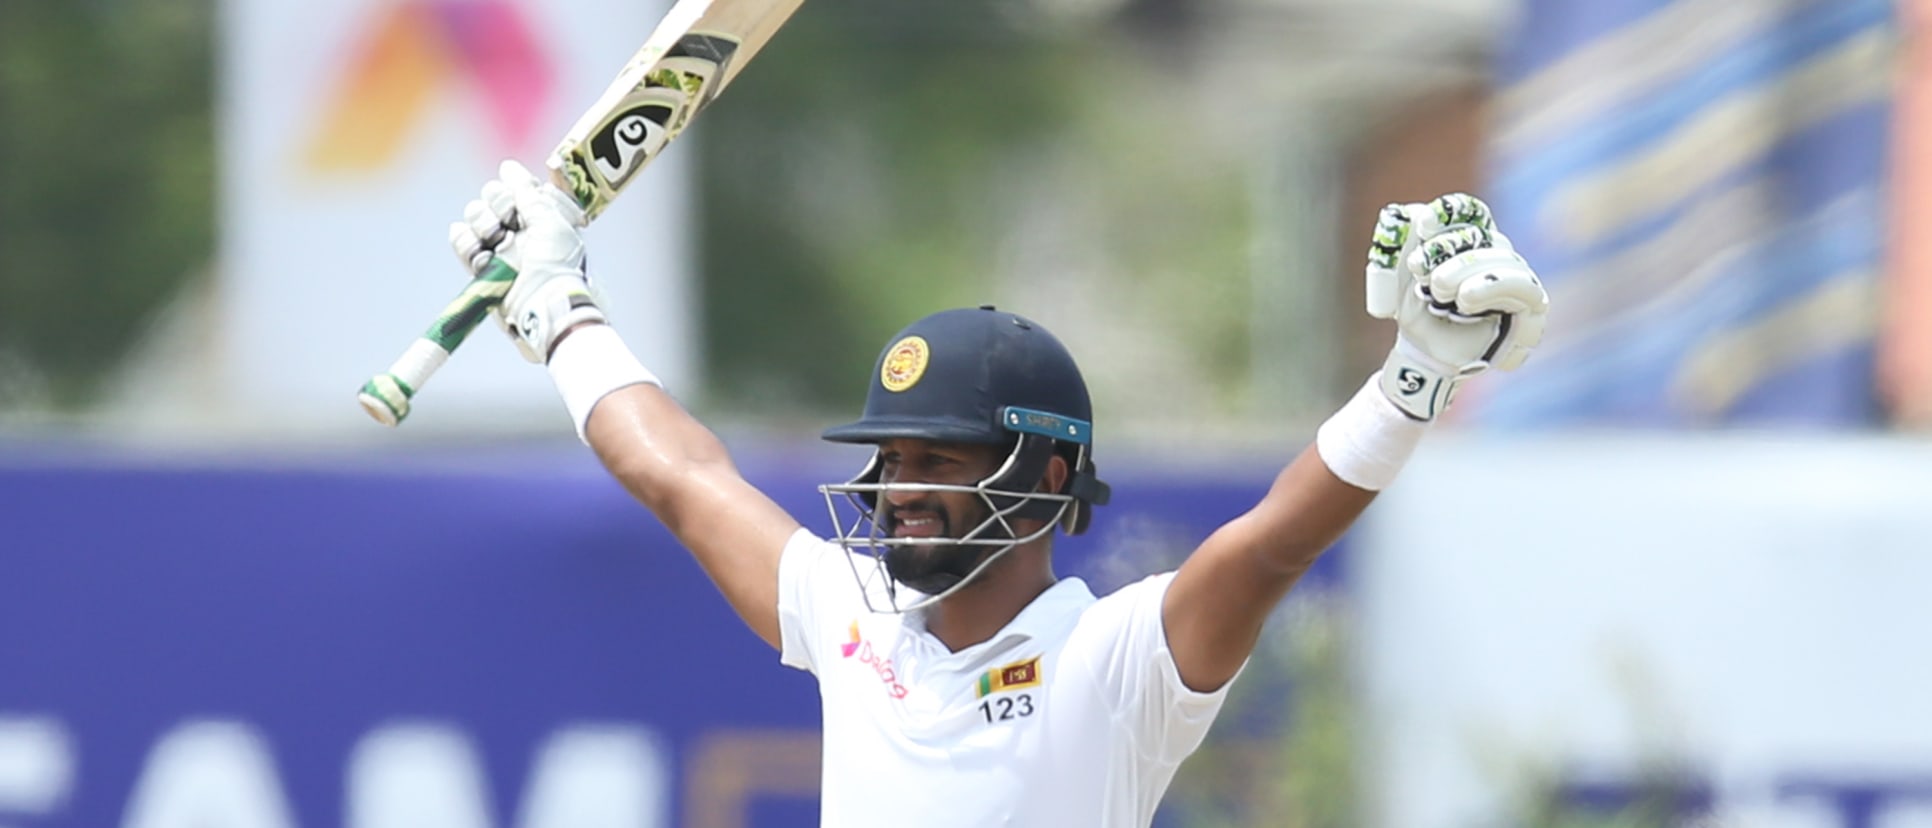 Karunaratne wishes to register 25 Test tons by the time he hangs his boots